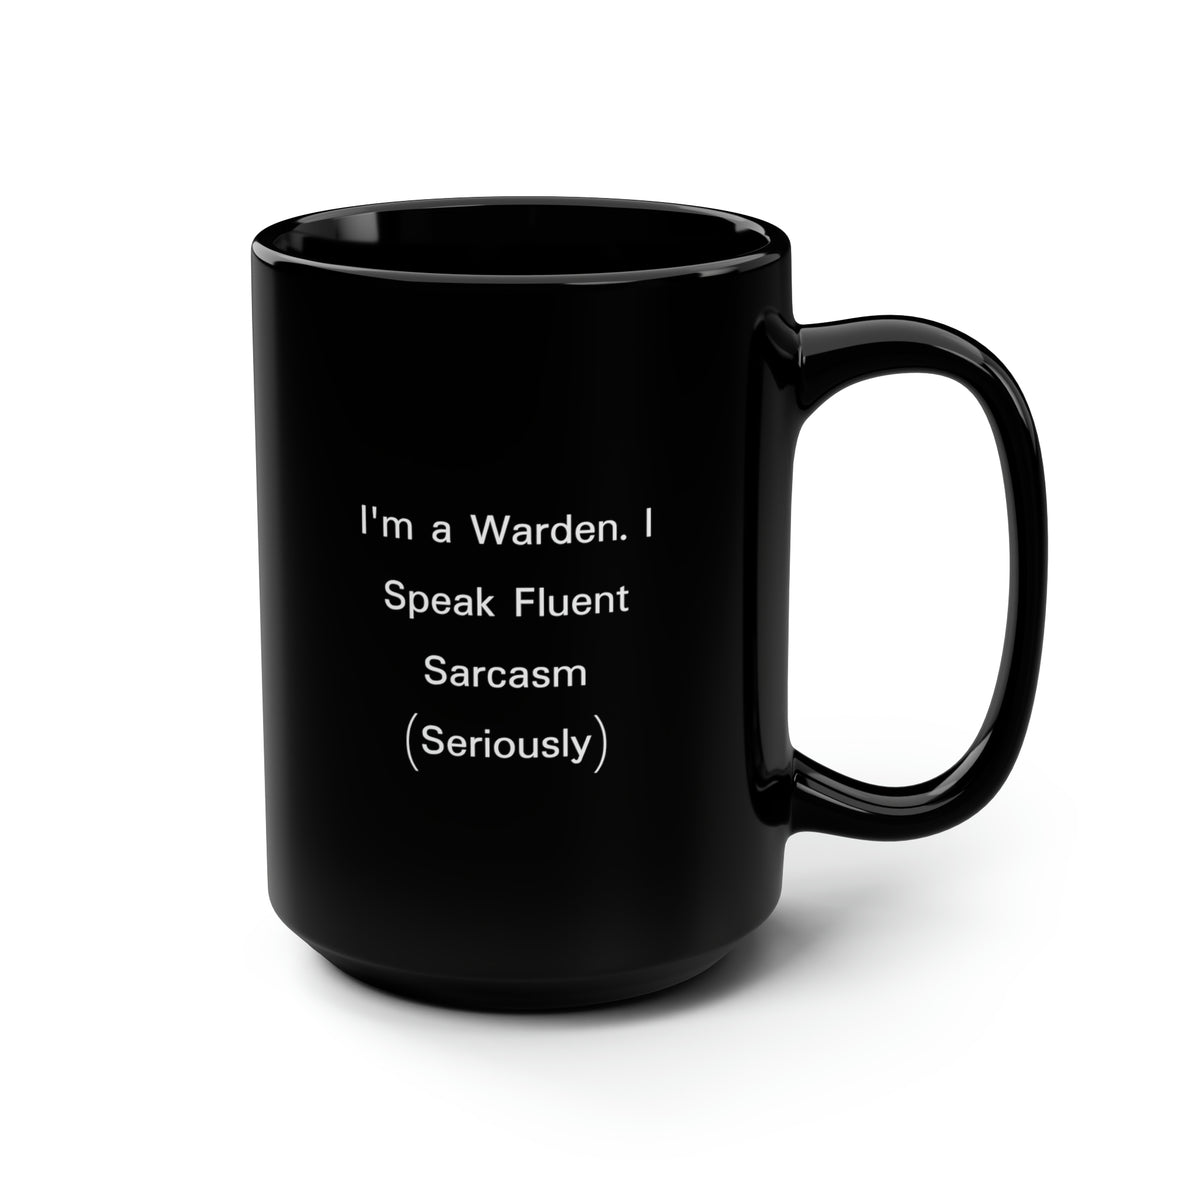 Fun Warden Gifts, I'm a Warden. I Speak Fluent Sarcasm), Useful Graduation 15oz Mug Gifts For Friends From Friends, Unique warden gifts, Prison guard gifts, Correctional officer gifts, Jailor